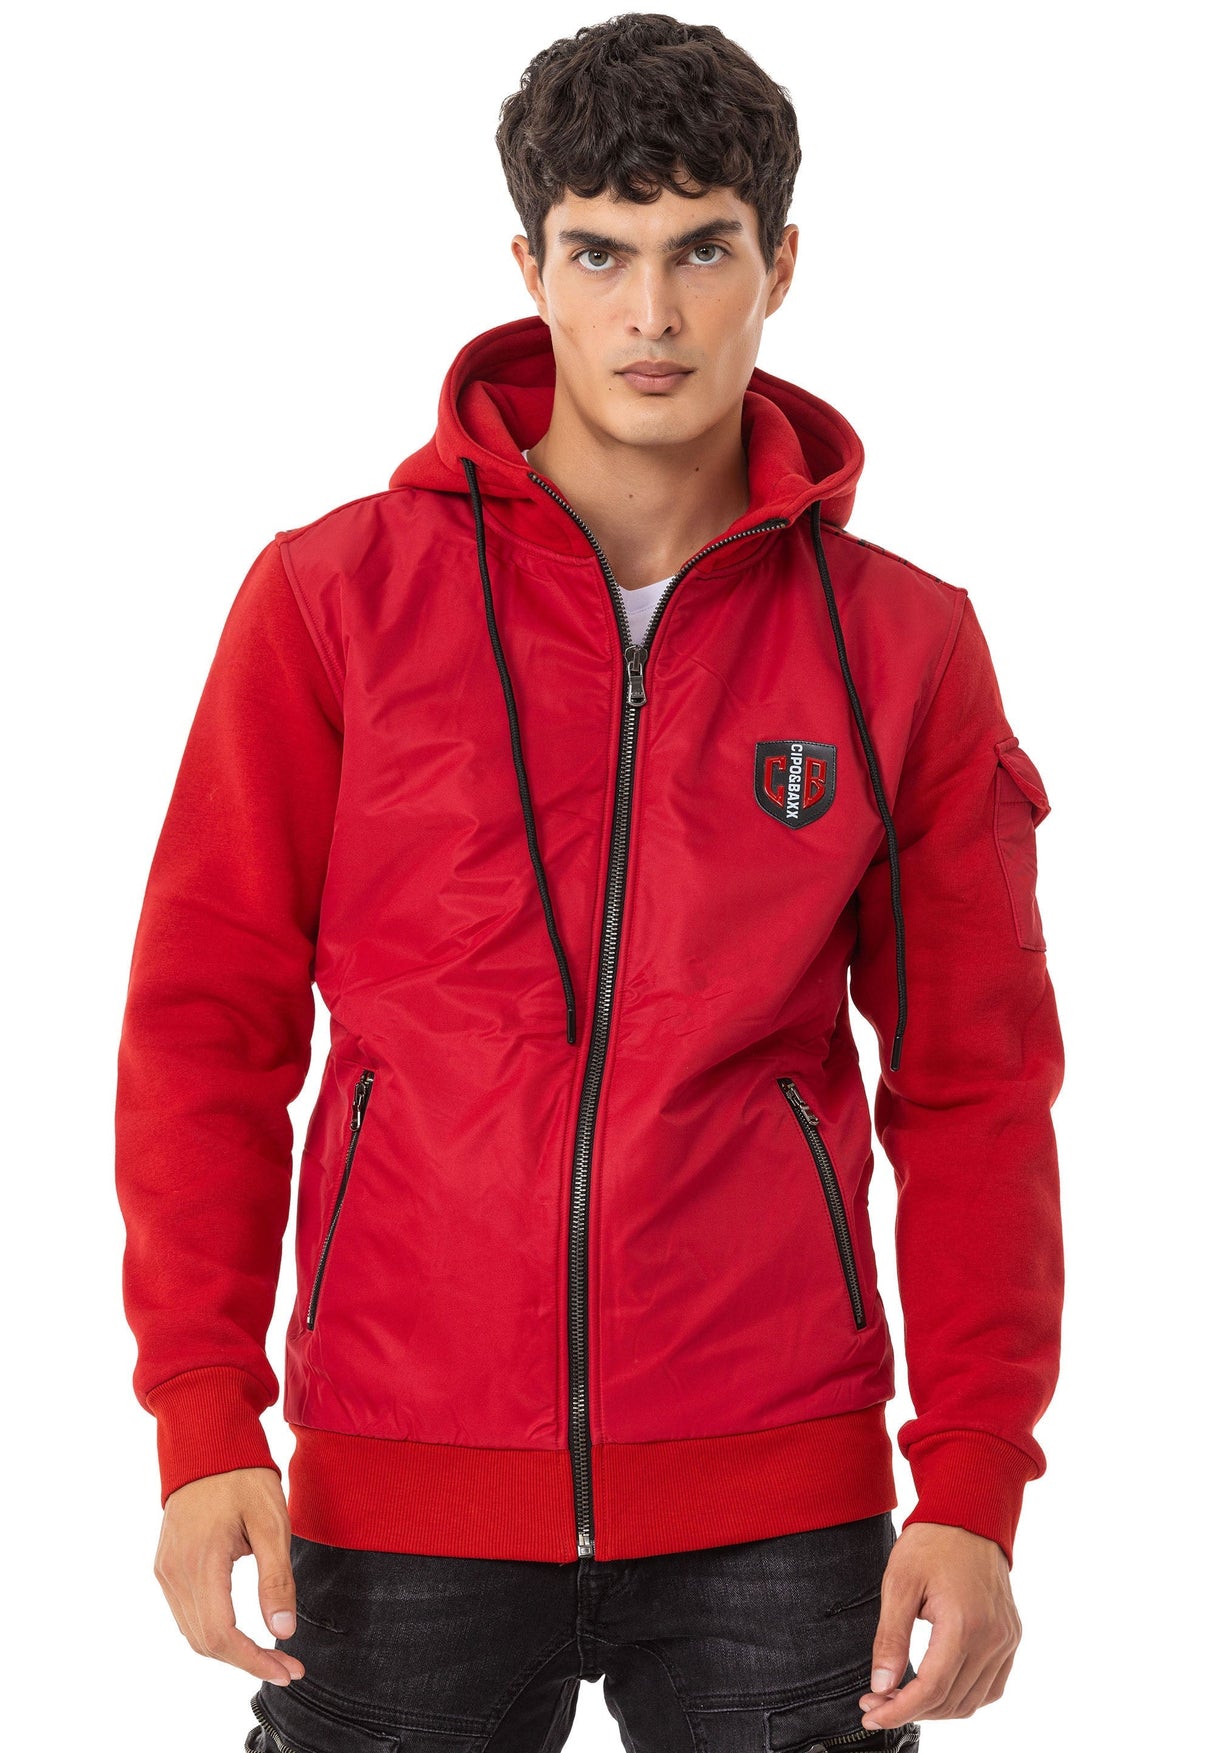 CL552 men's sweat jacket in a cool look with hood